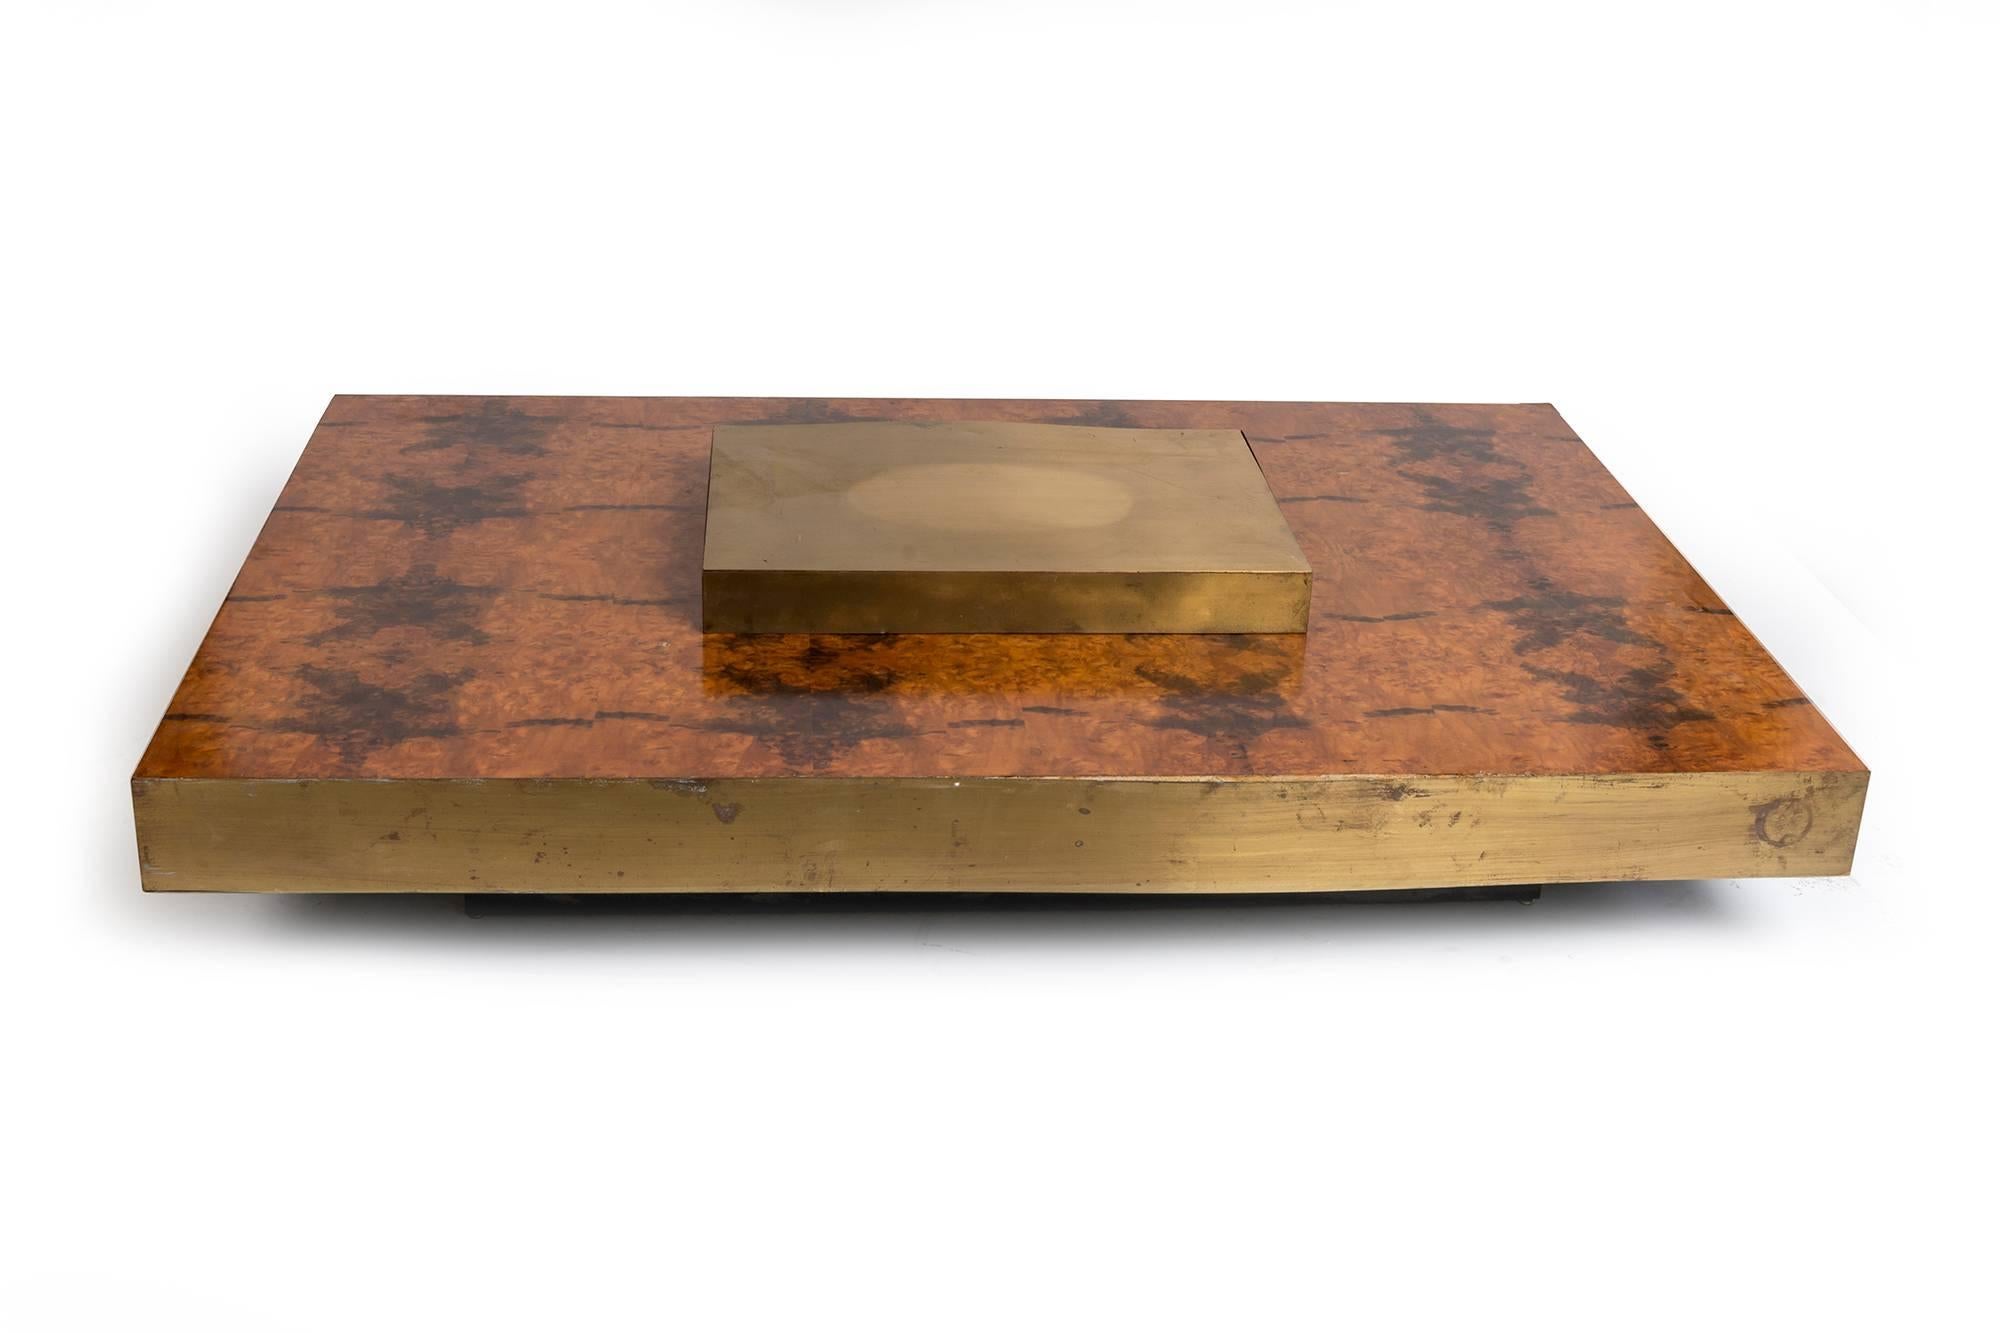 An unusual piece for a coffee table. Brass-trimmed with a brass inlay on the center of this low piece with lacquered wooden accents.